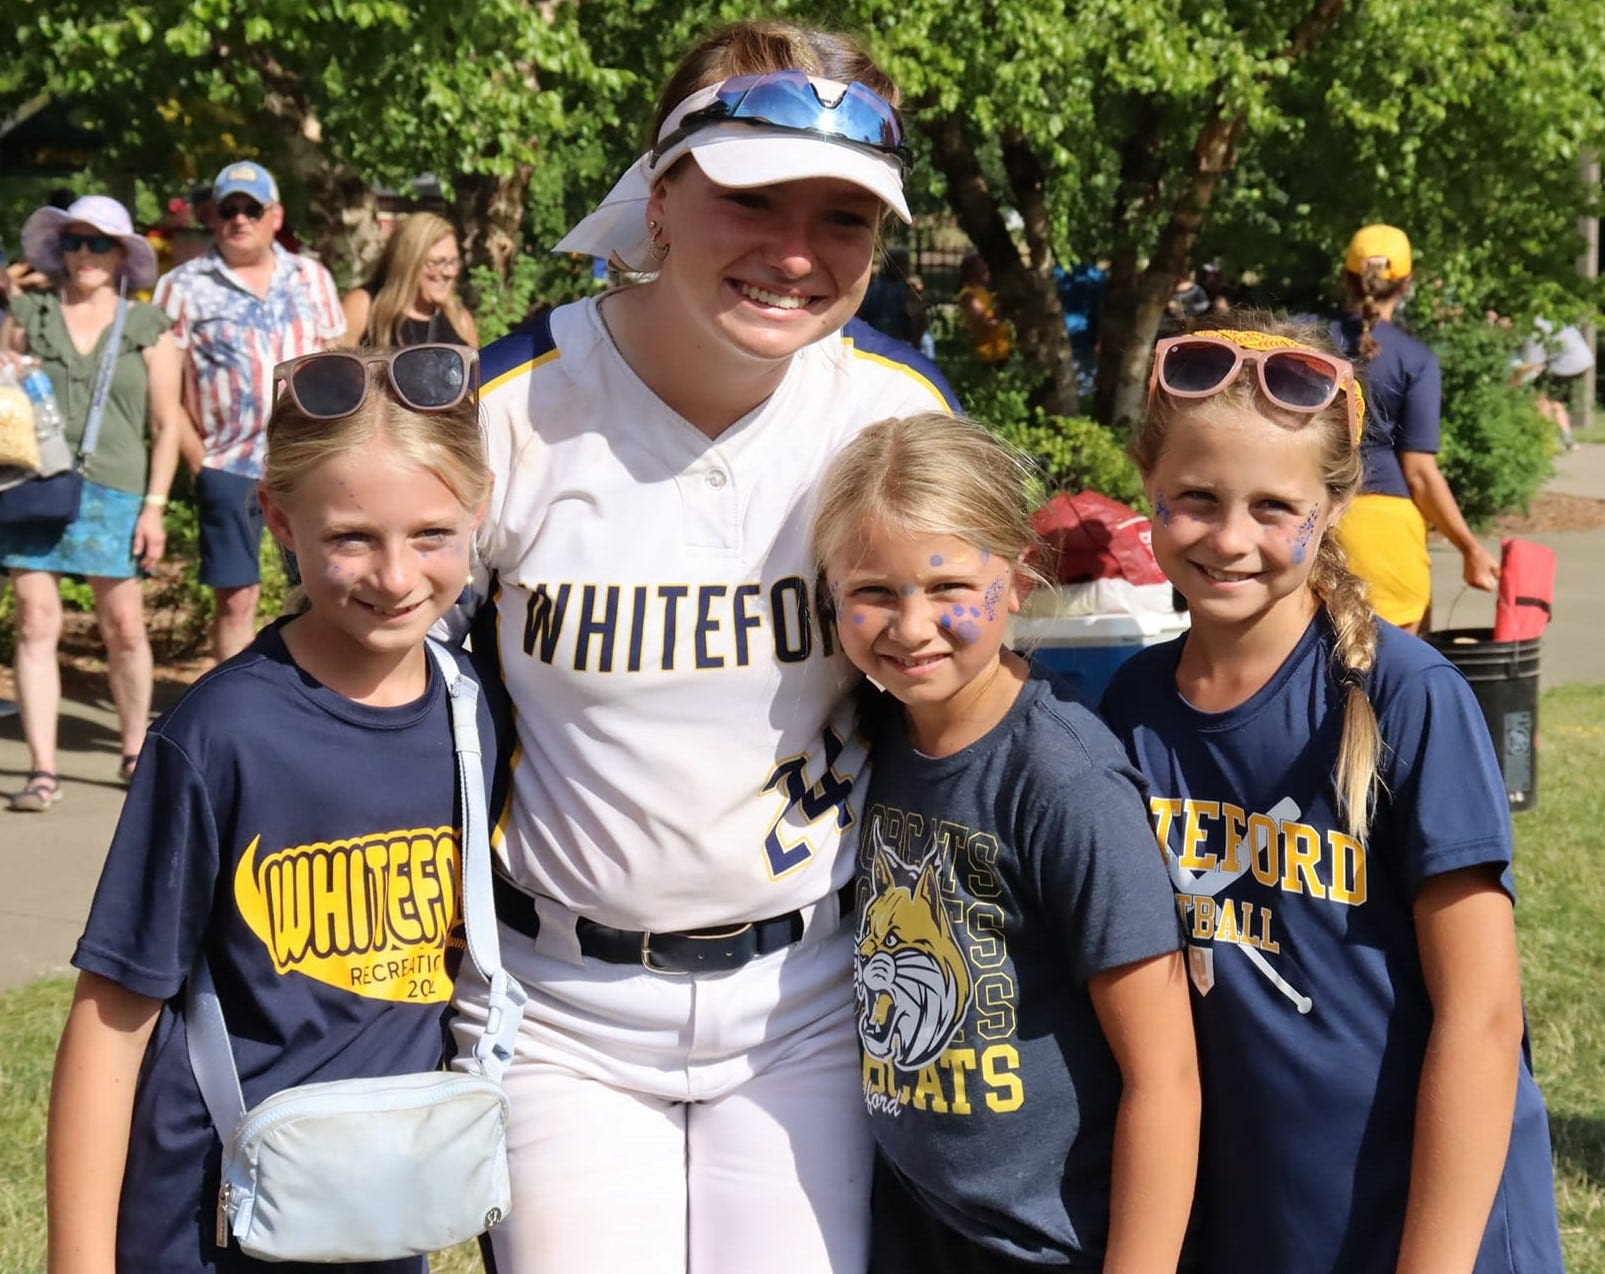 Loss in finals reveals character of Whiteford softball team